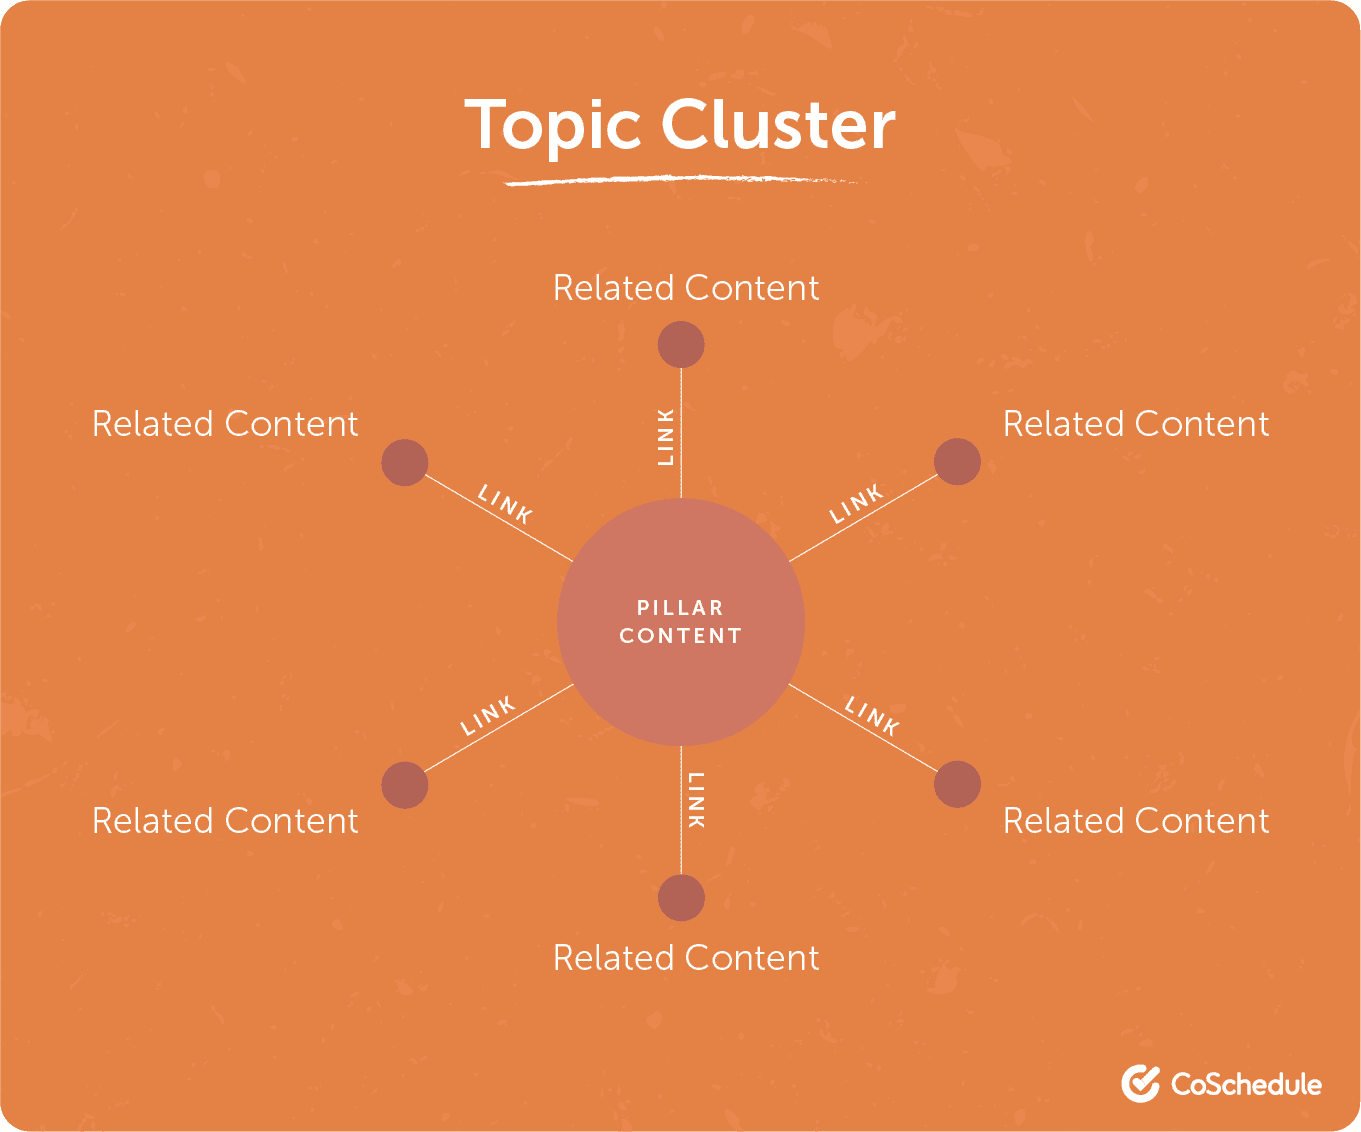 Topic cluster map from CoSchedule